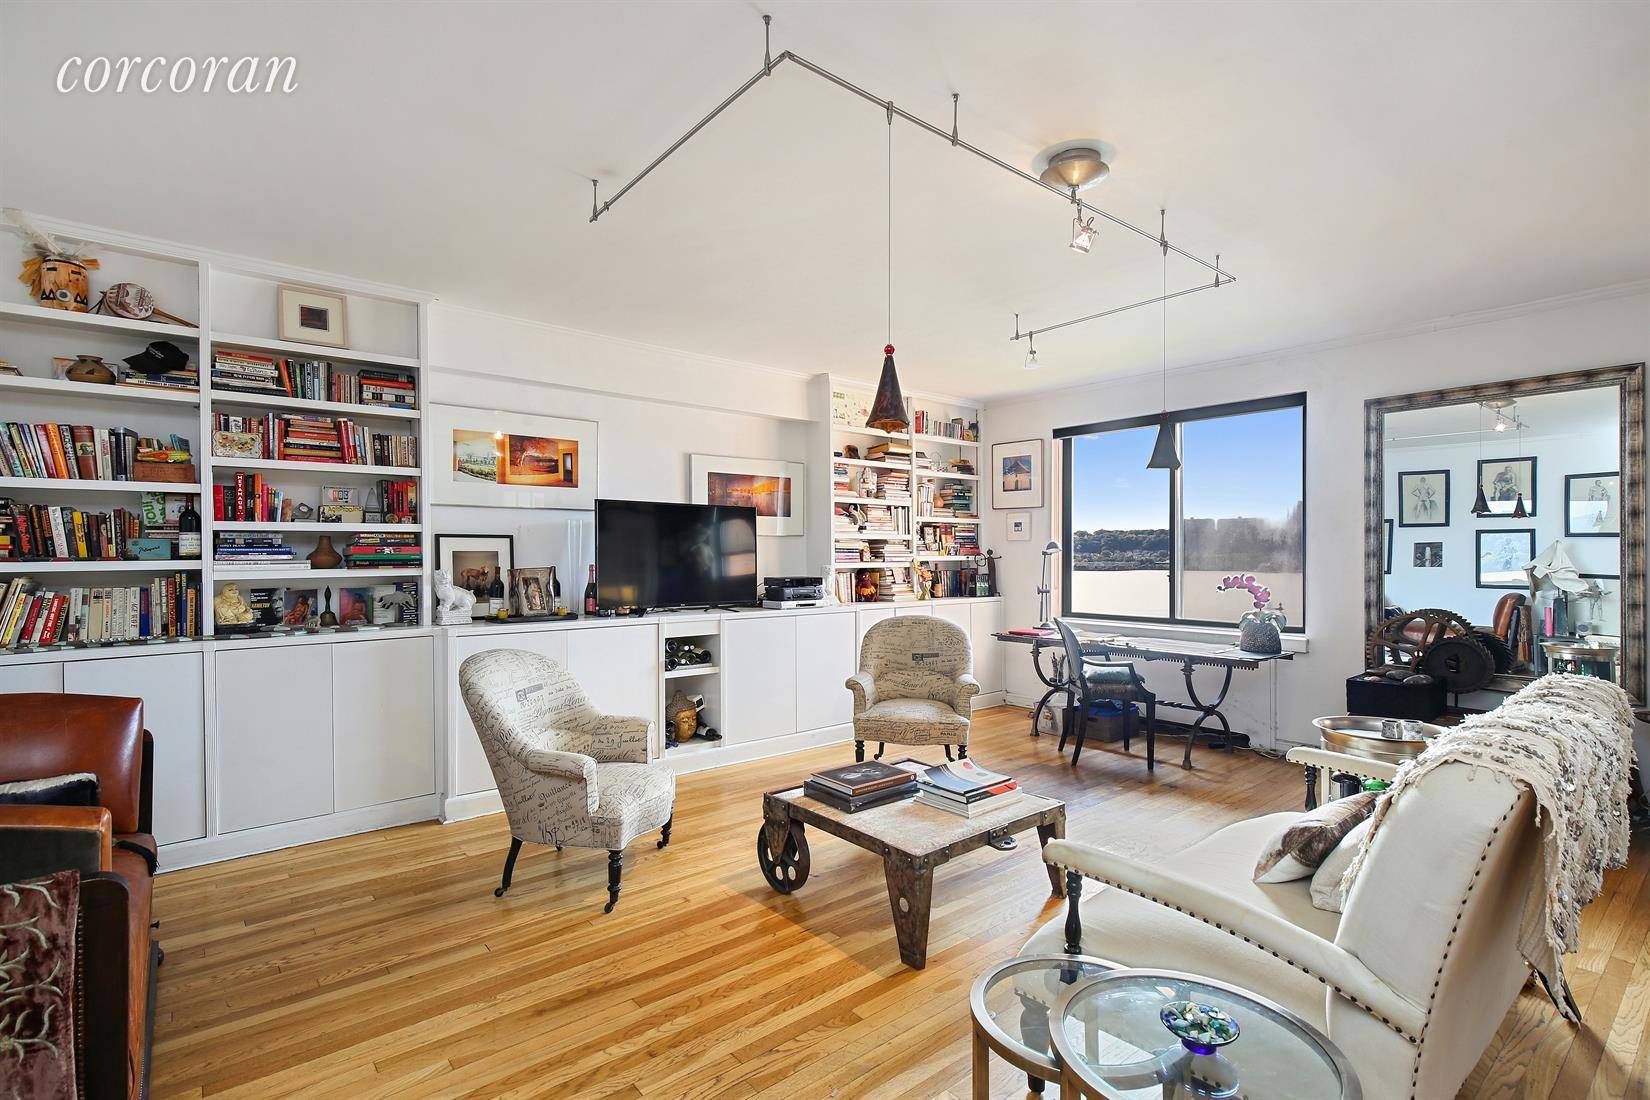 EXCITING OFFERING ON RIVERSIDE DRIVE Luxuriate in space in this smartly designed one of a kind home with 4 exposures, gorgeous natural light and unobstructed views of the Hudson River.